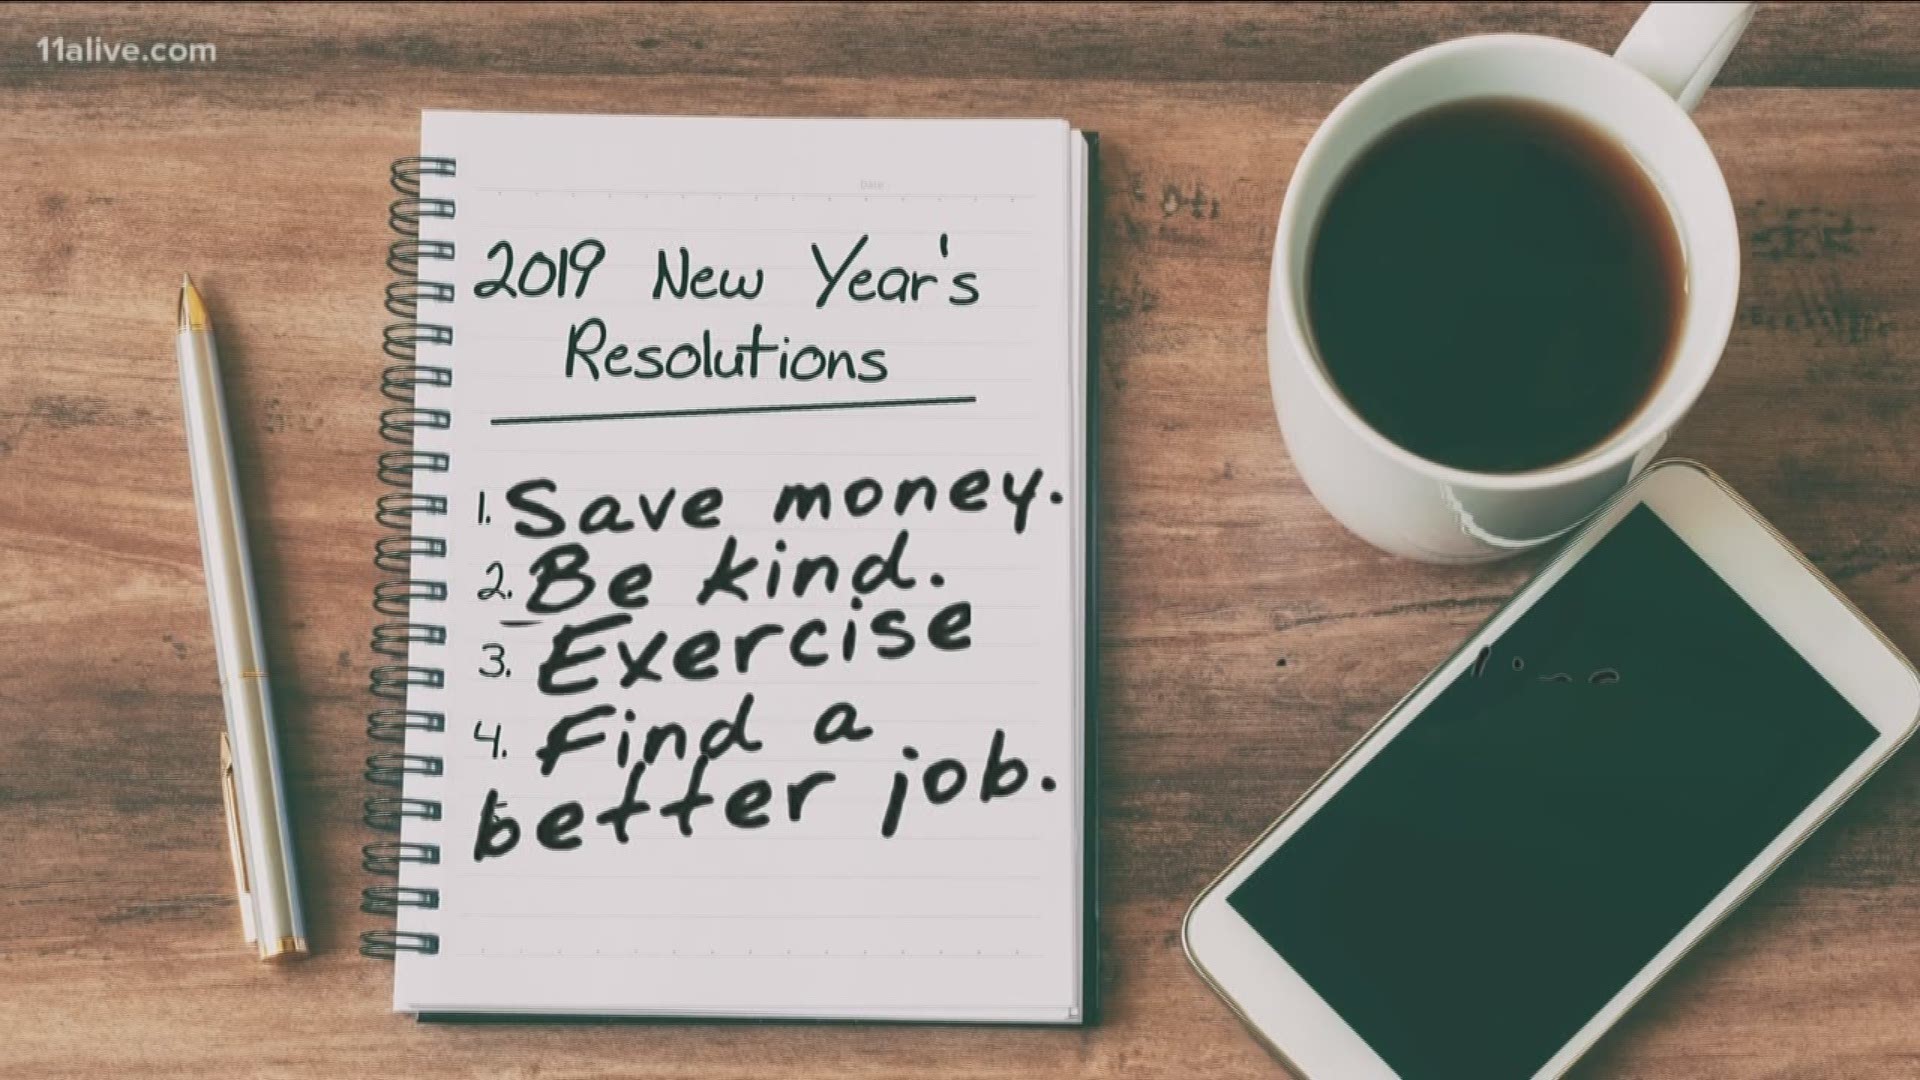 It's so easy to give up on our New Year's resolutions